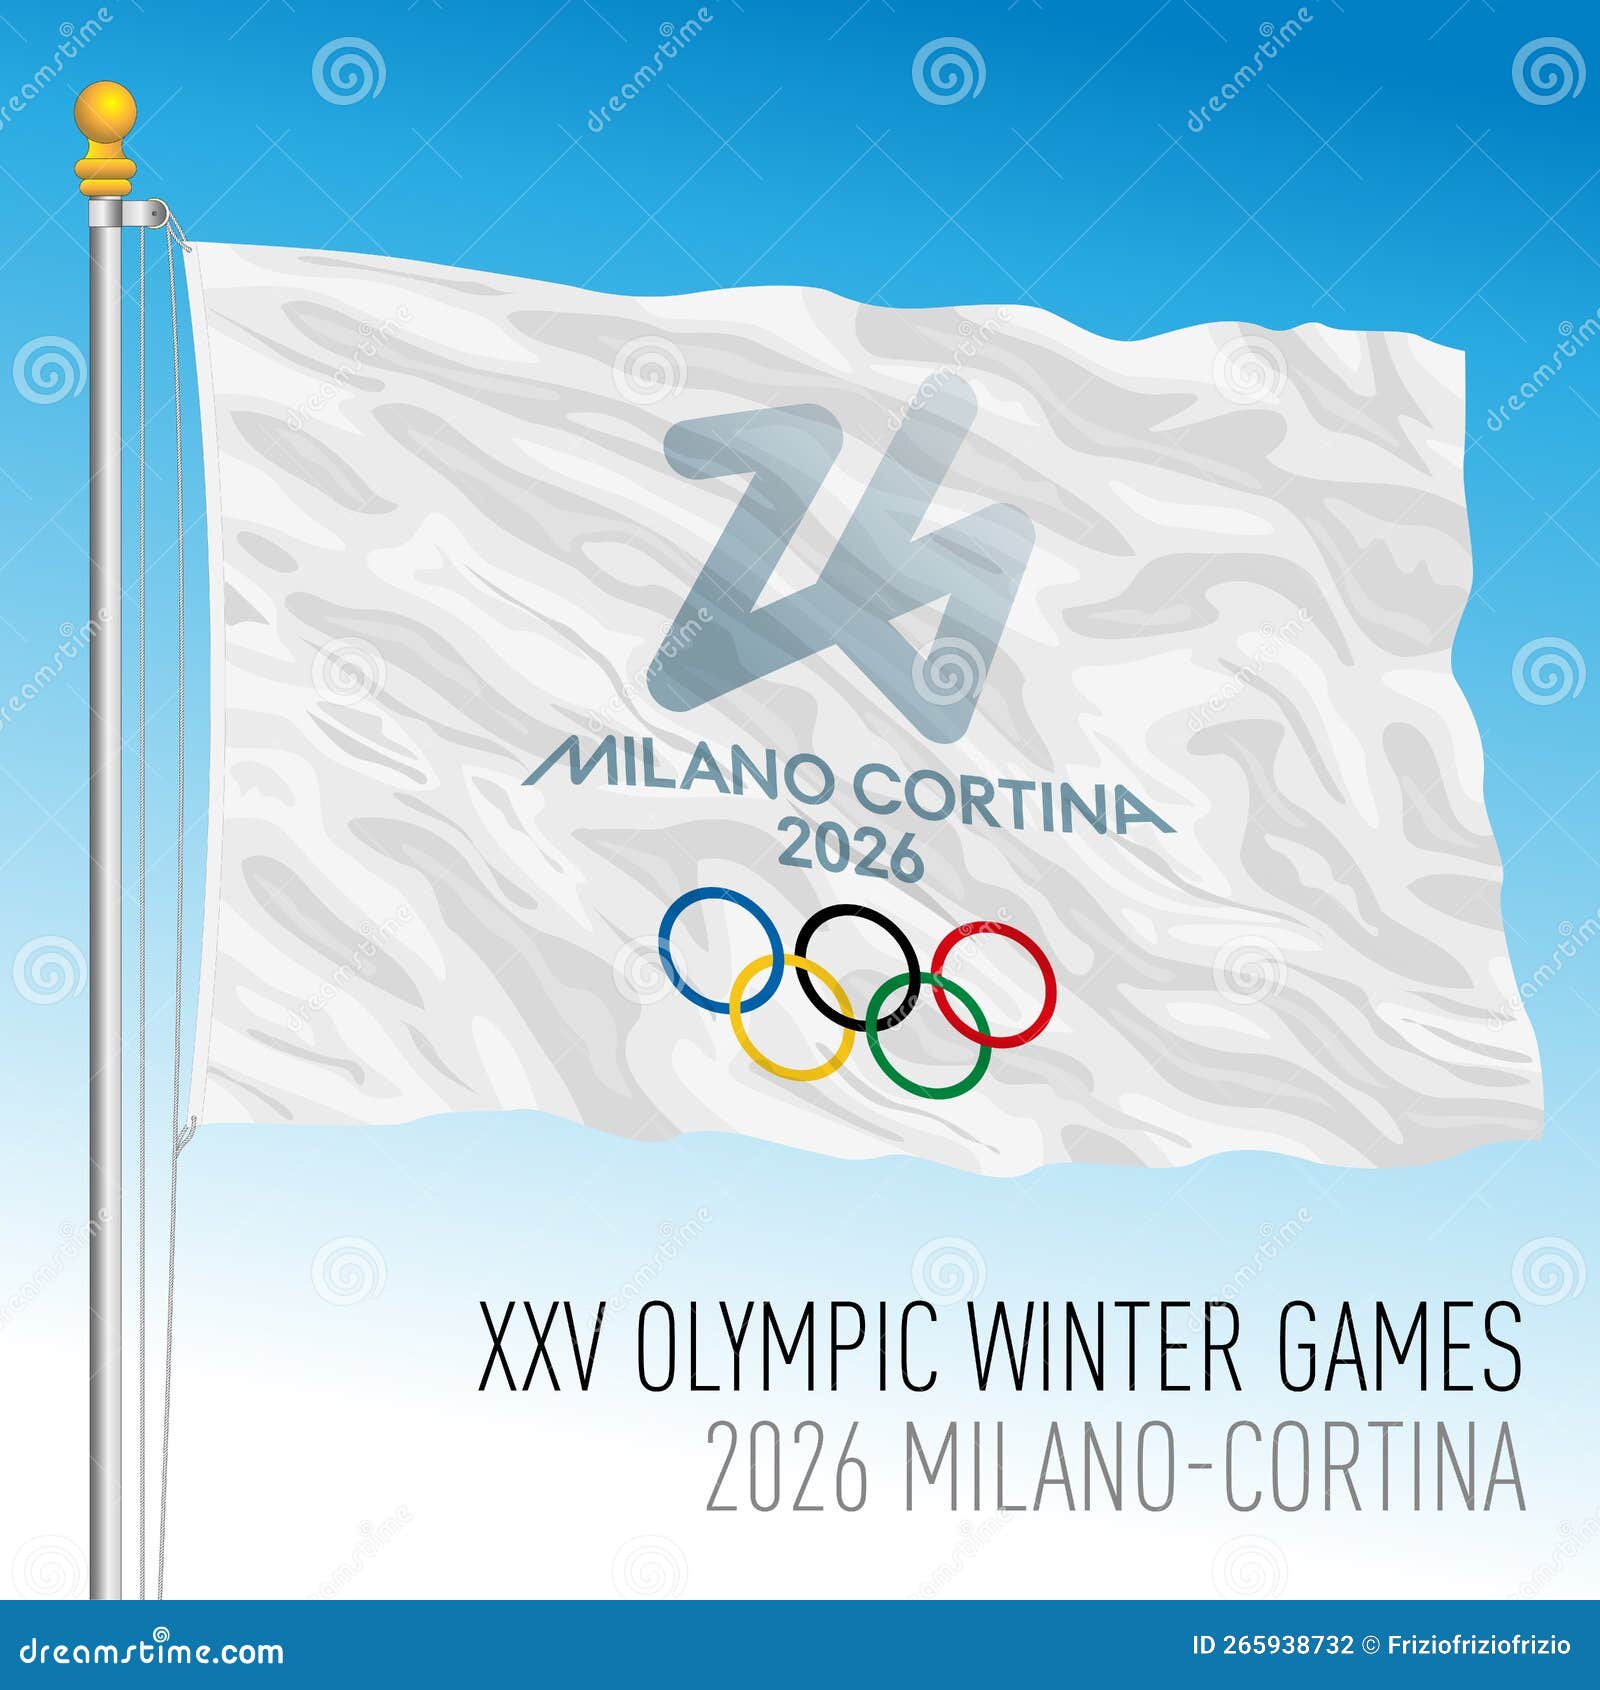 XXV Olympic Winter Games 2026 Flag, Milano And Cortina Vector ...